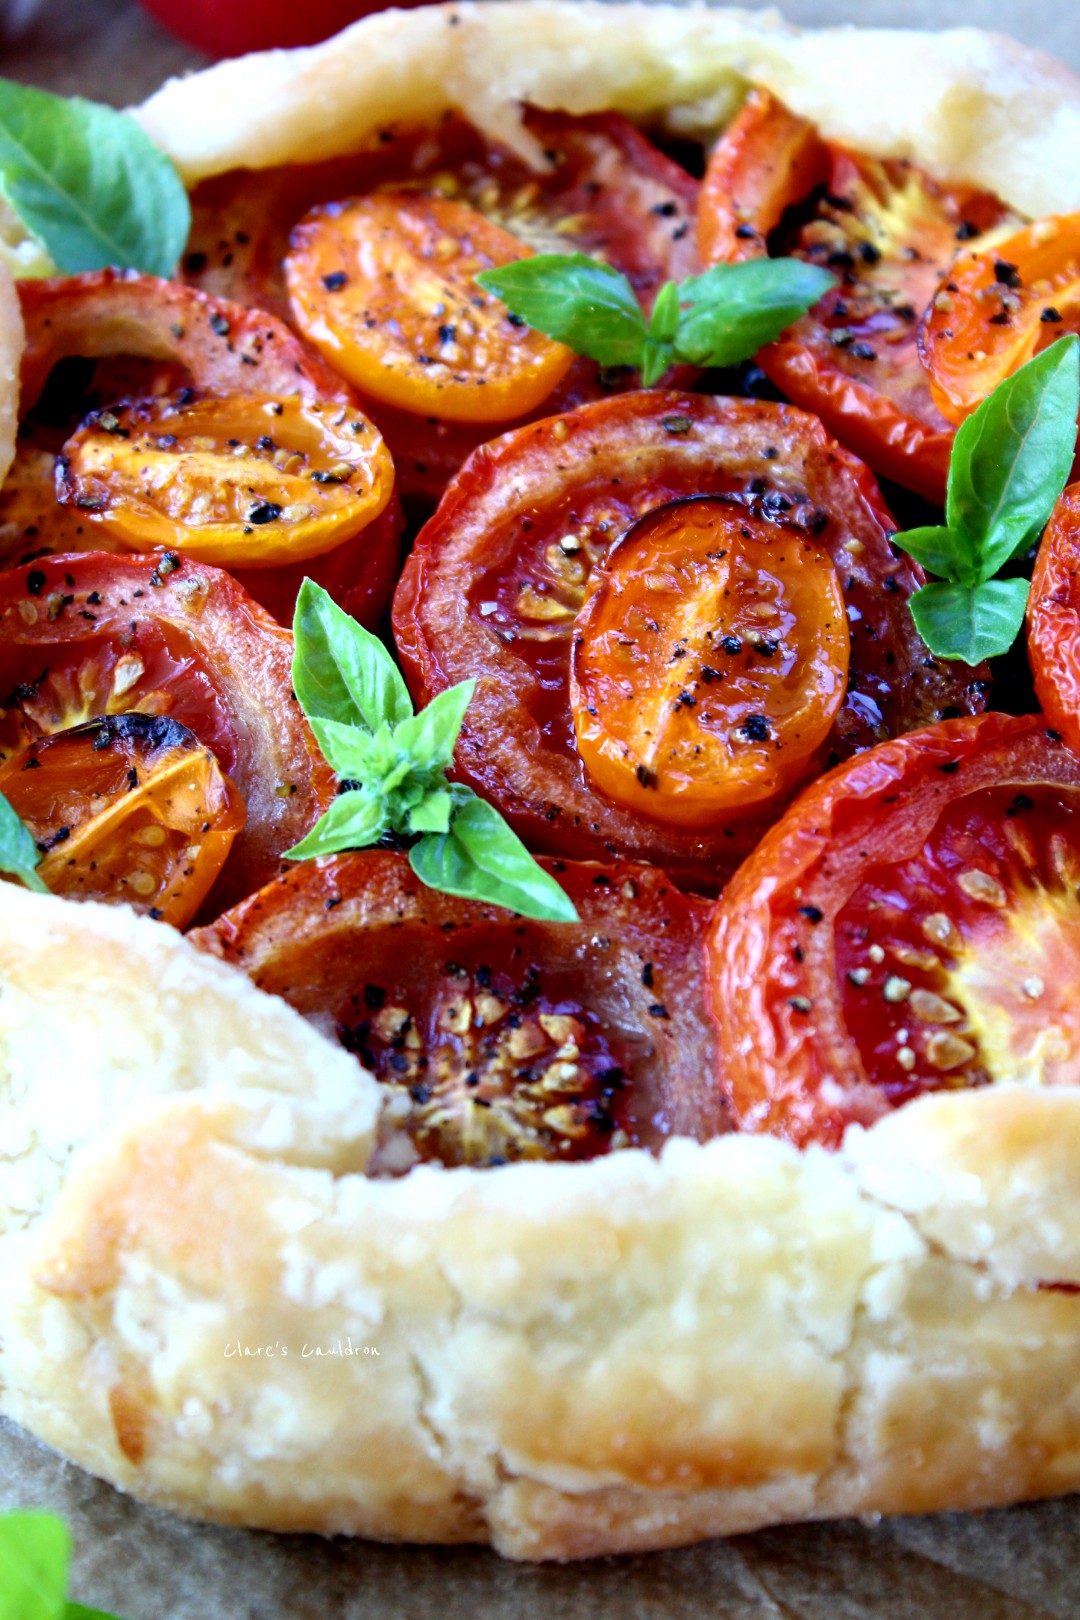 Lets Make Some Pastry……….. Well A Tomato And Pesto Galette